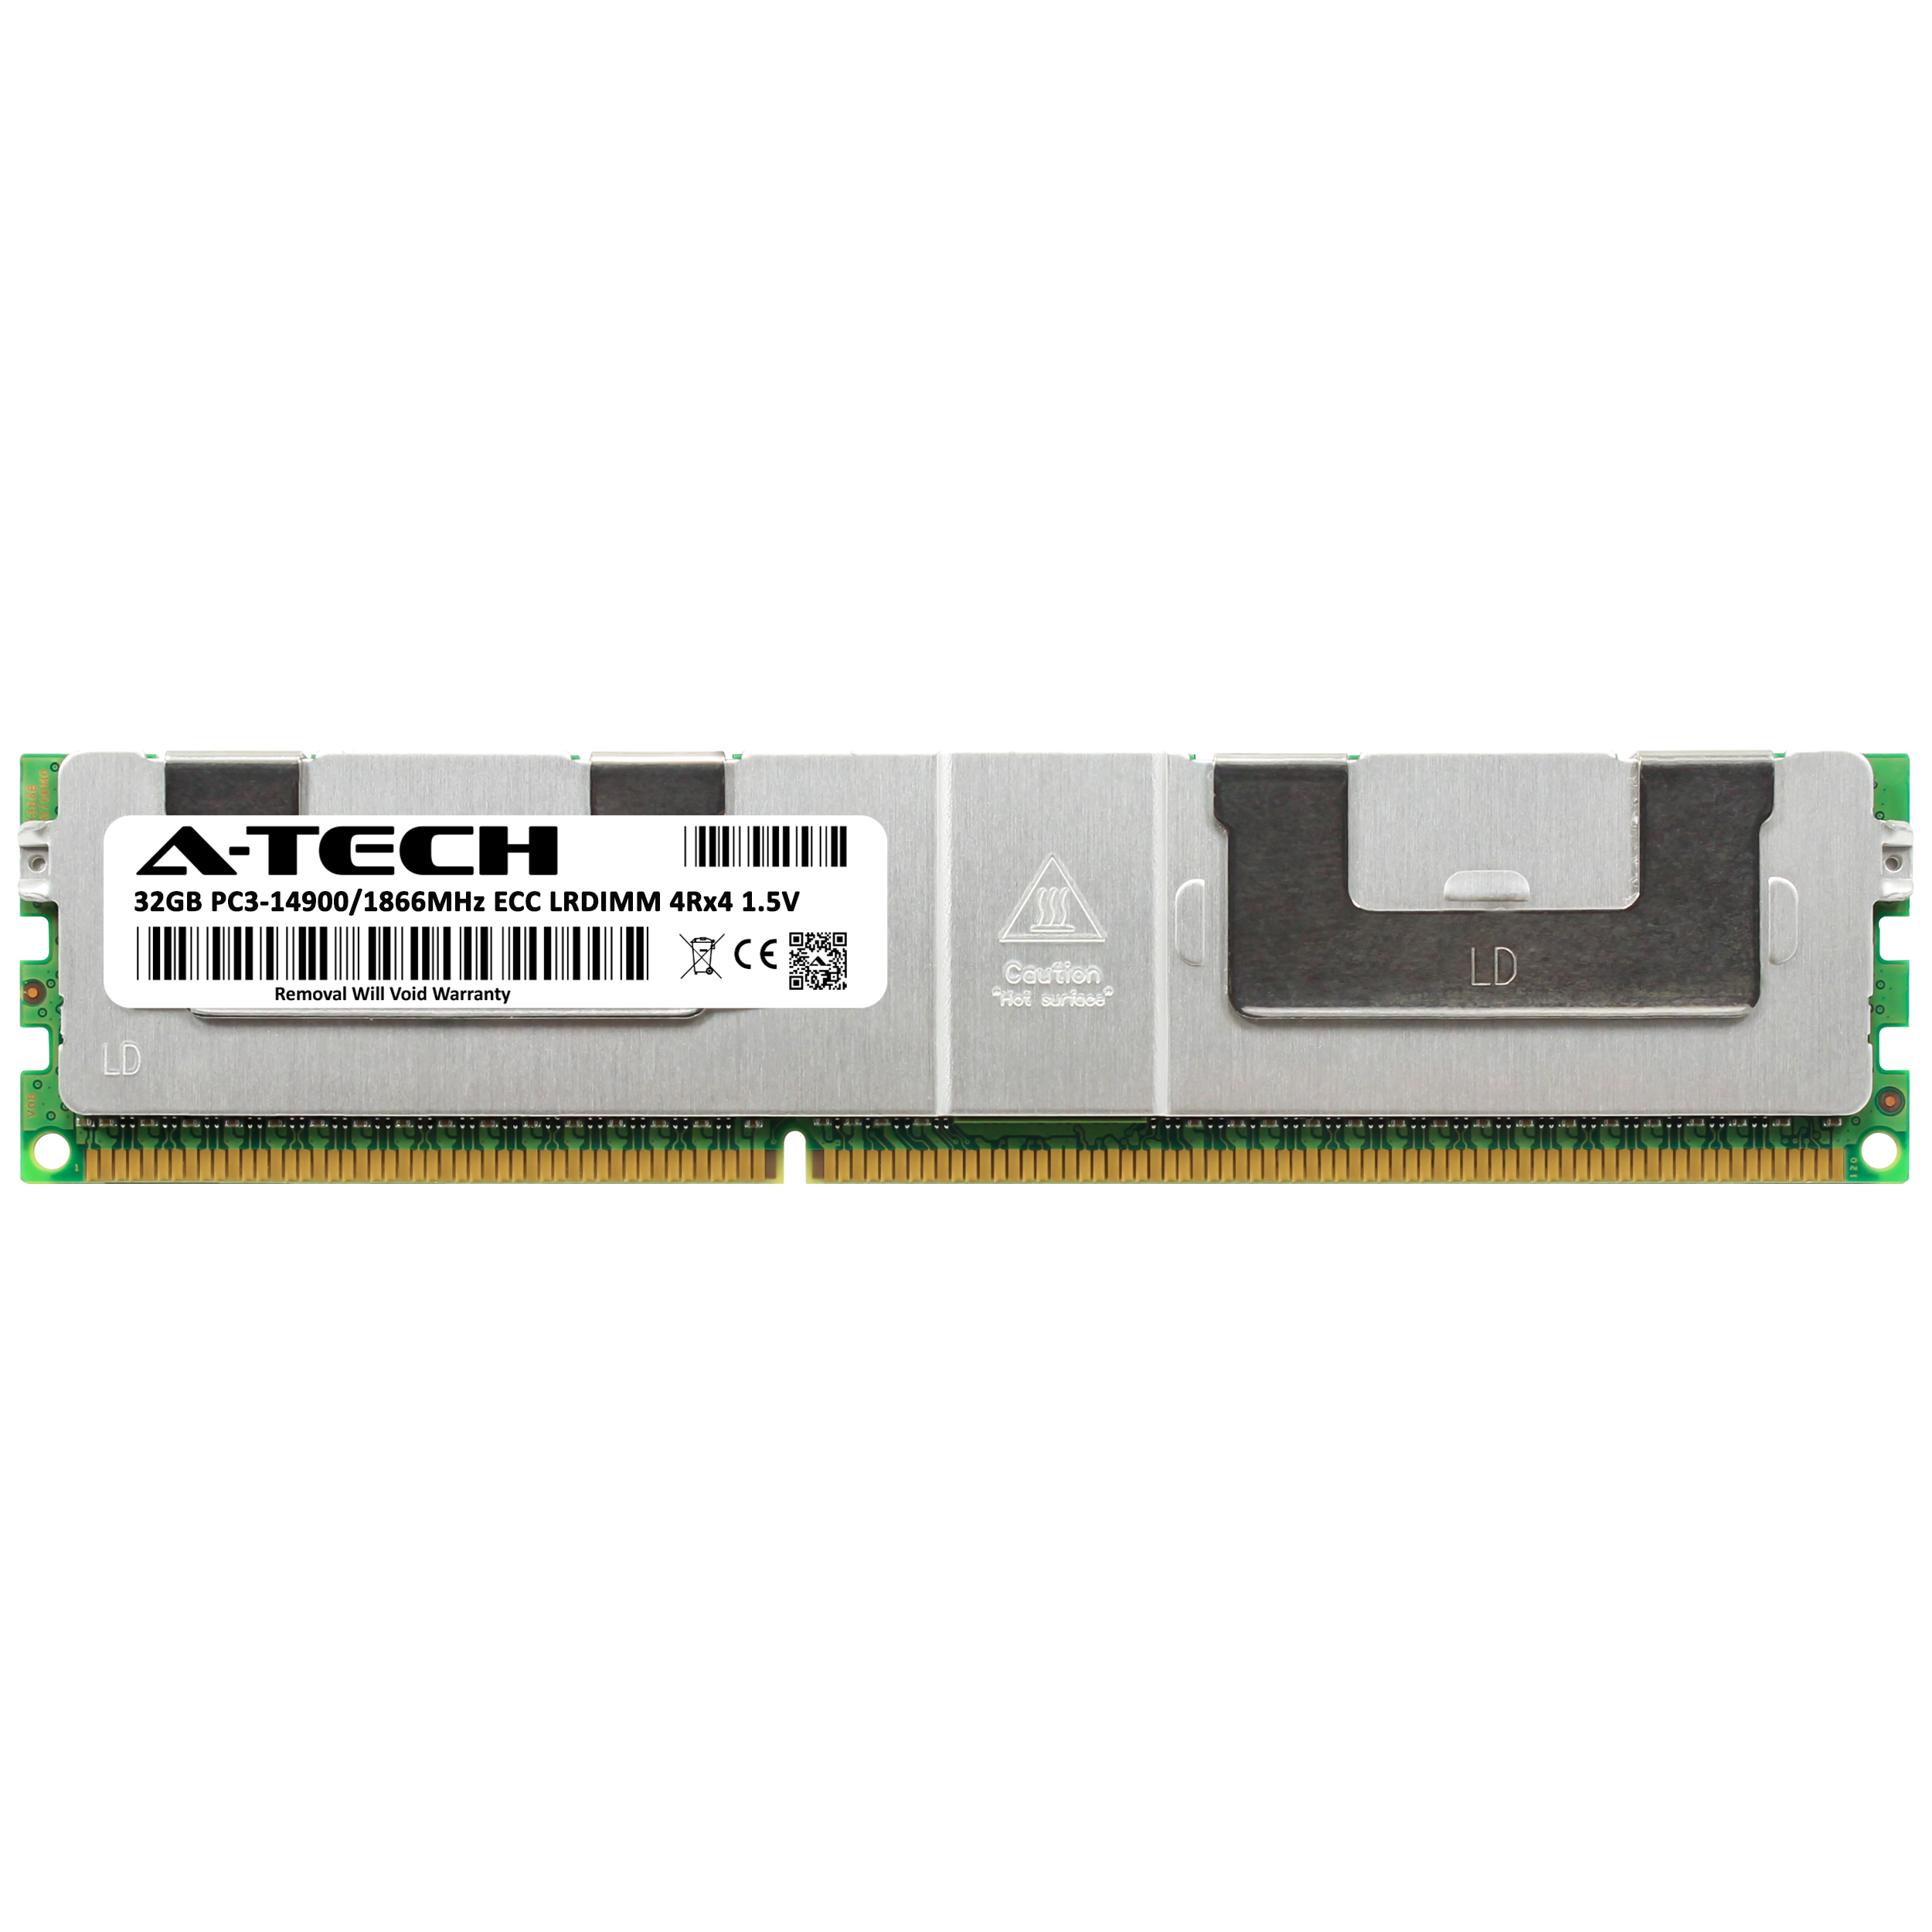 DDR3 1866MHz PC3-14900 ECC Load Reduced LRDIMM 4rx4 1.5v Single Server Memory Ram Stick A7187321-ATC A-Tech 32GB Replacement for Dell A7187321 